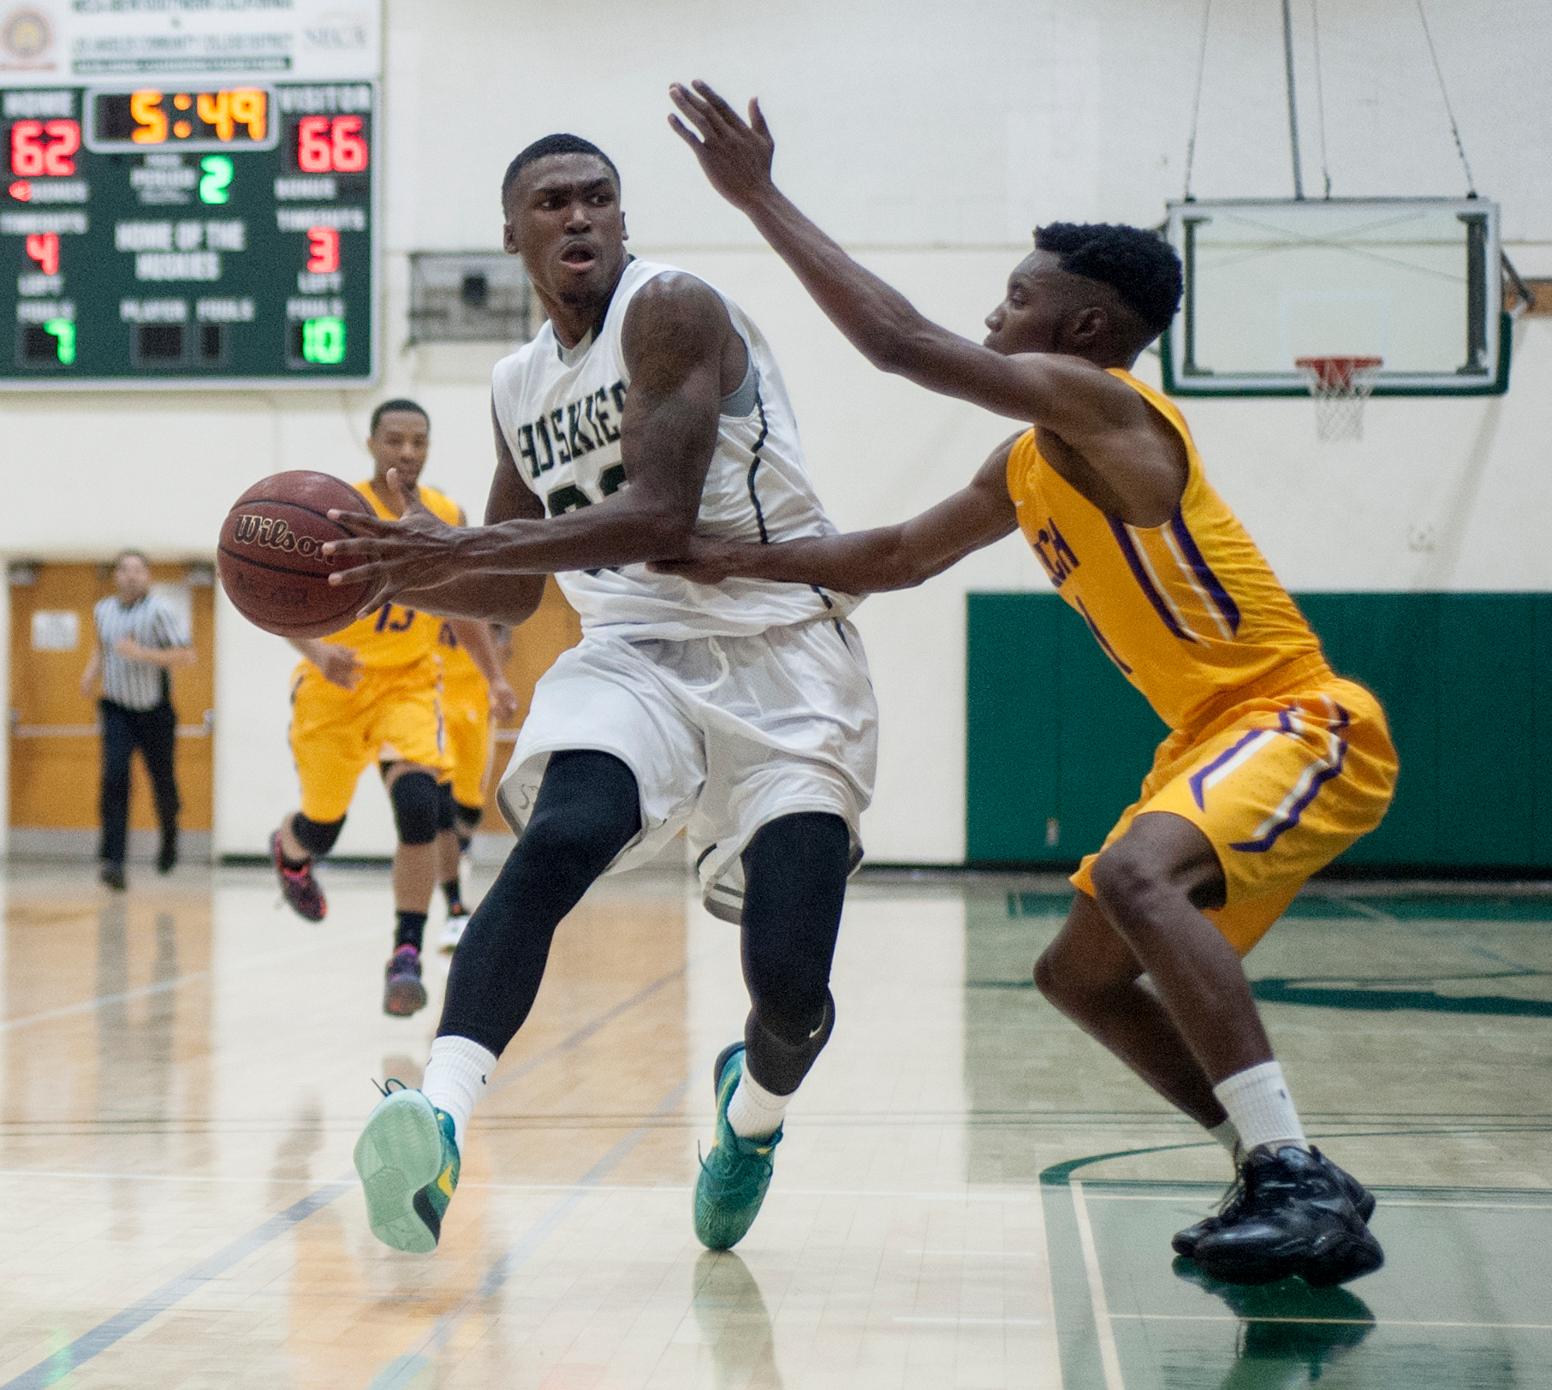 ELAC sophomore guard Jarrell Tate attempts a pass near the paint, in an 81-73 Husky win against rival L.A. Trade Tech. (Photo by Tadzio Garcia)